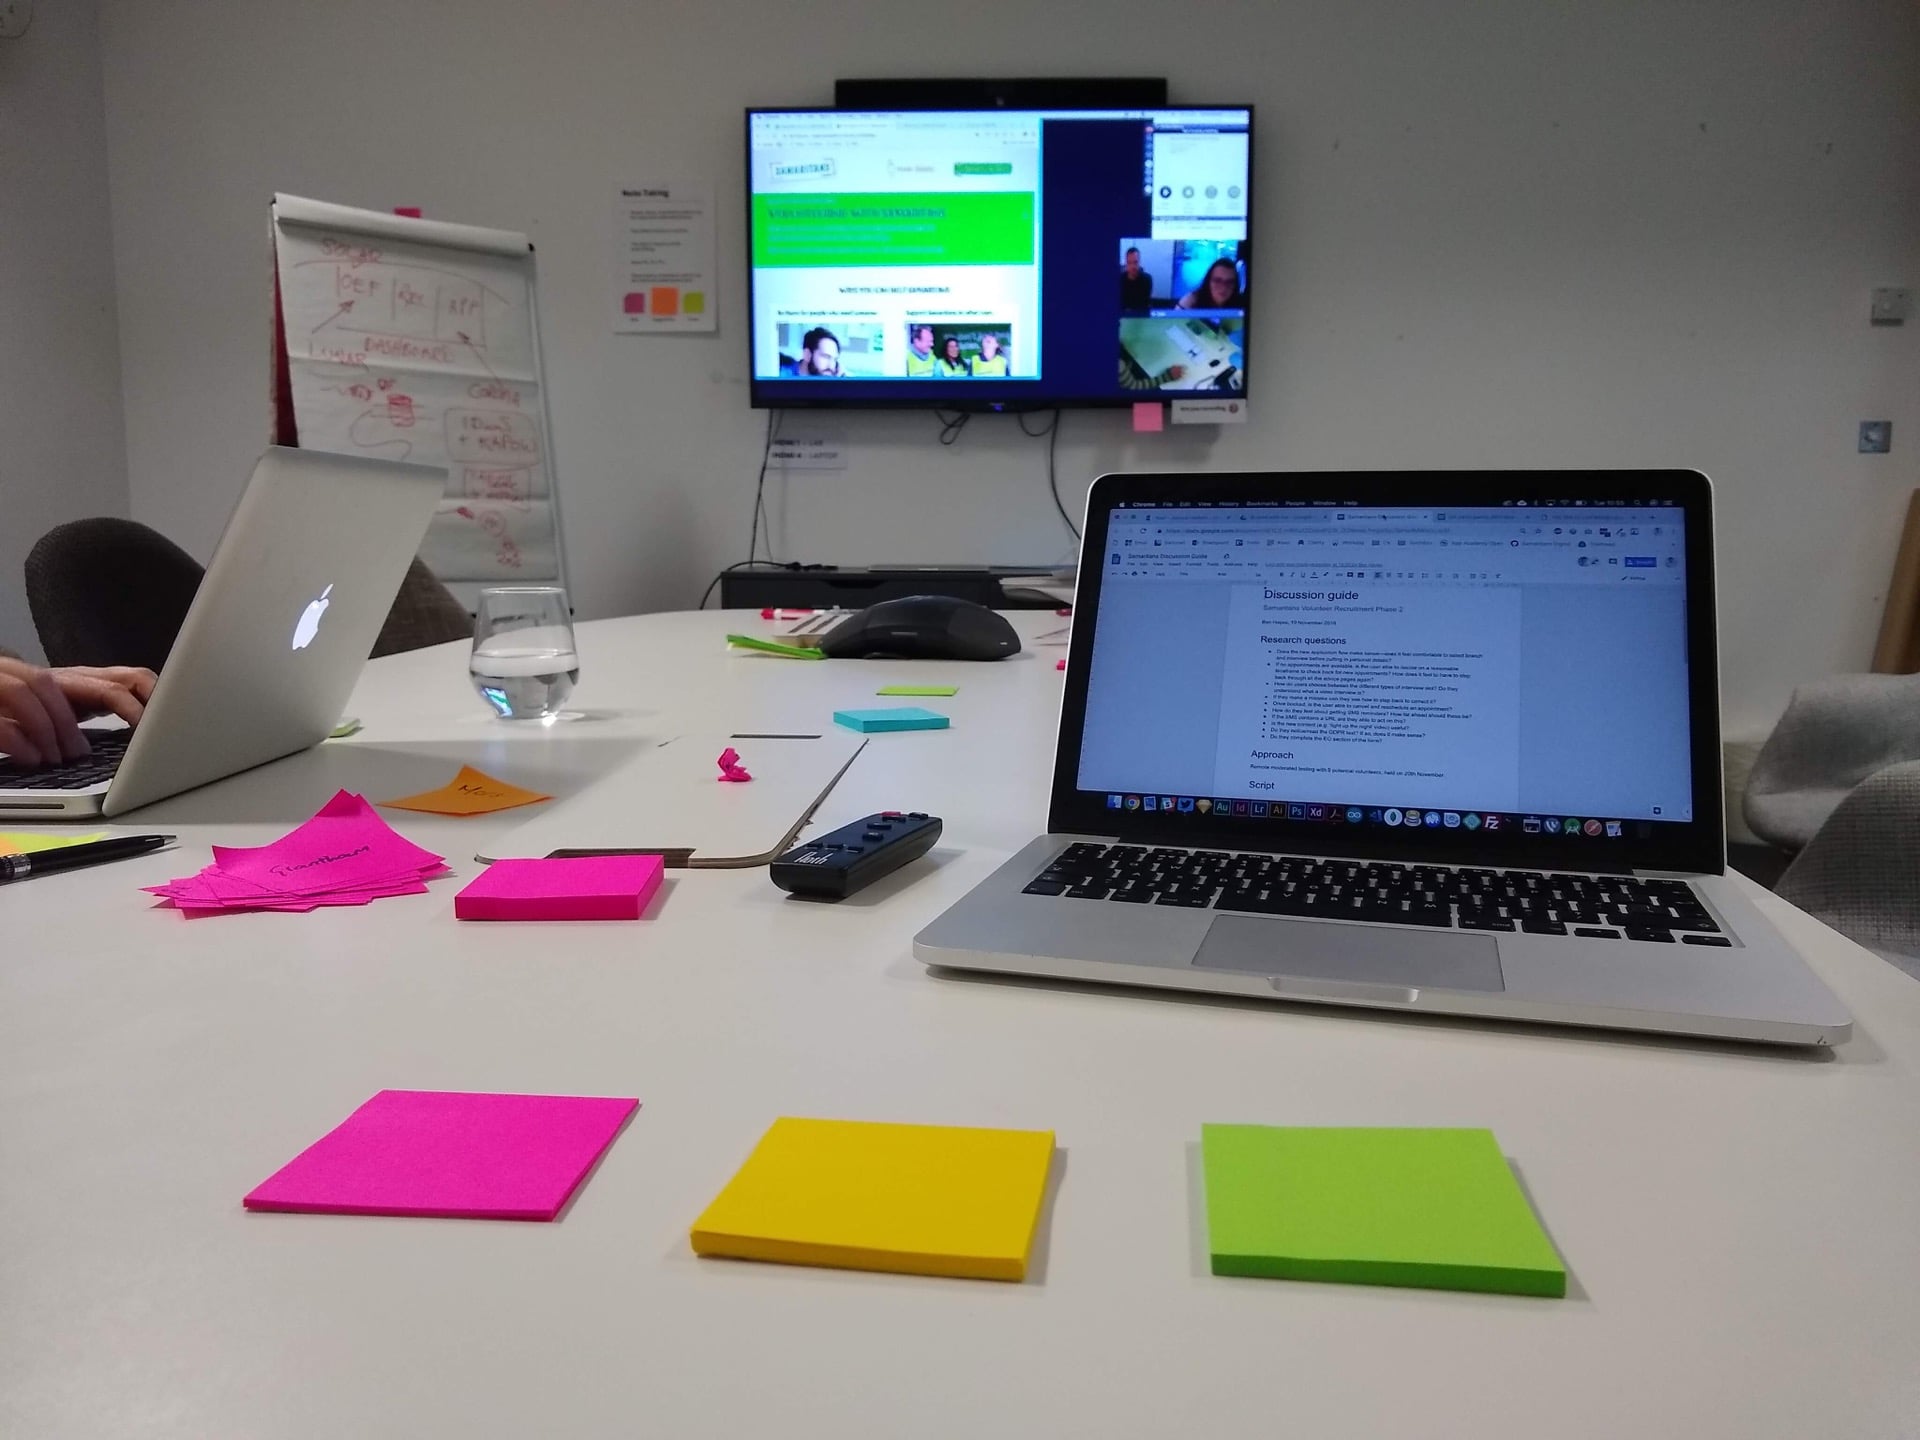 We use post-its a lot.